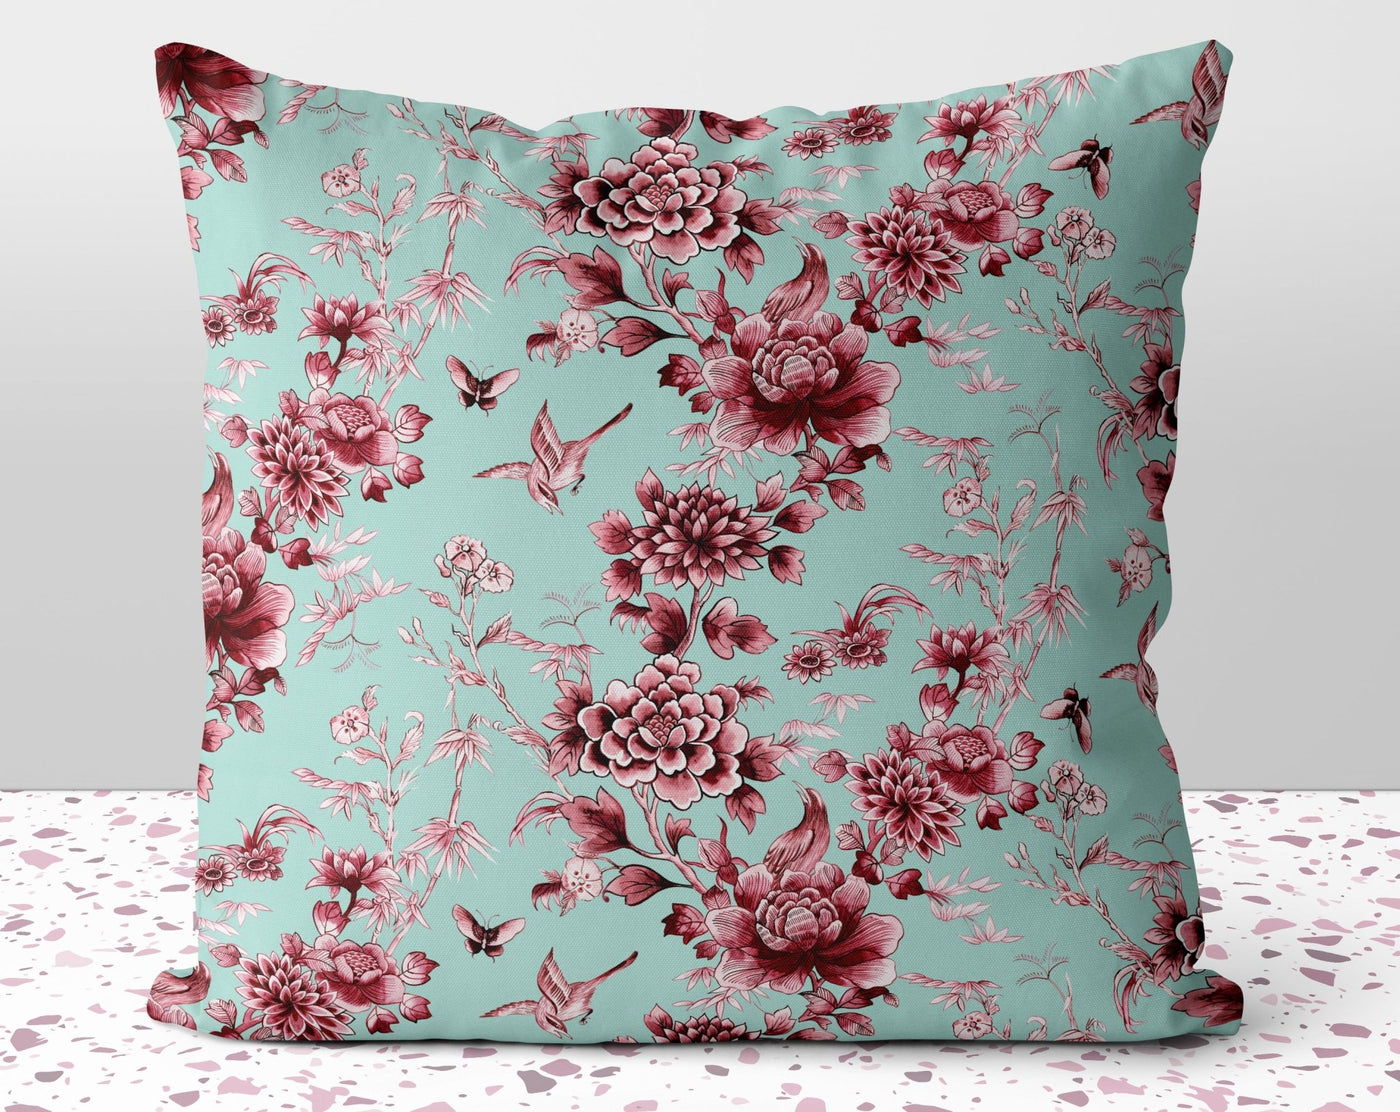 Floral Chinoiserie Flowers Red on Green Sea Square Pillow with Cover Throw with Insert - Cush Potato Pillows